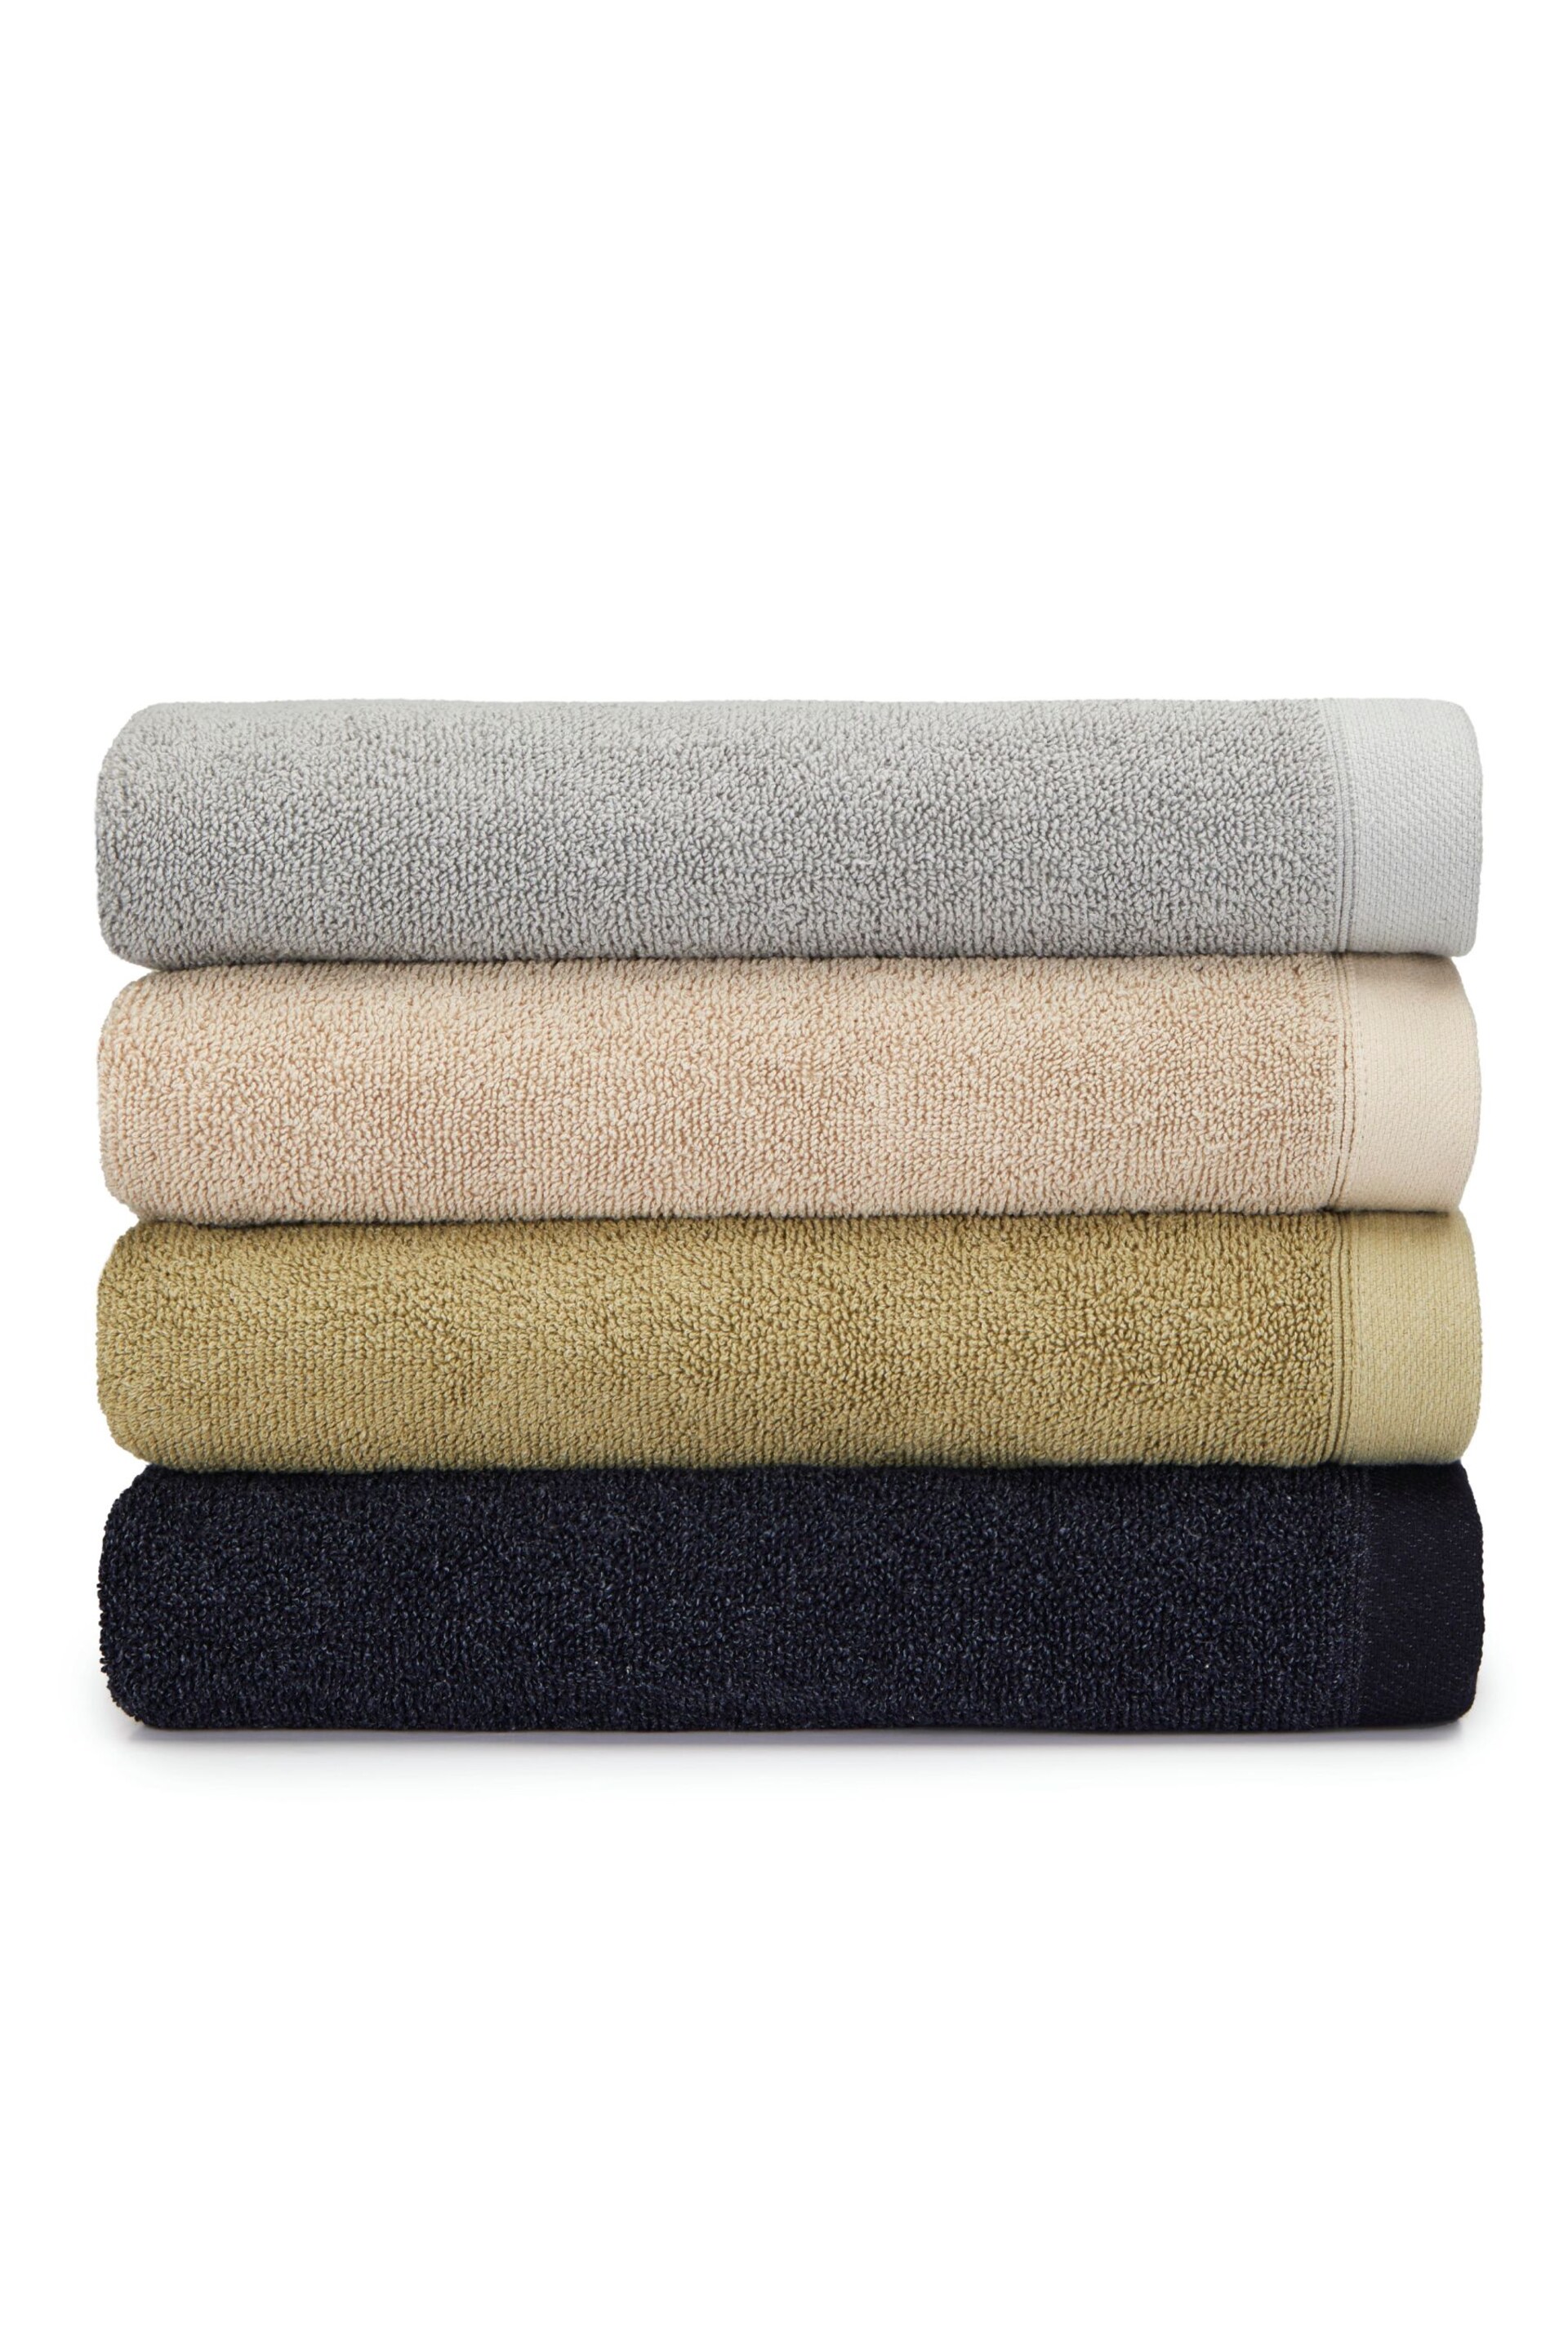 Drift Home Grey Abode Eco Towel - Image 4 of 6